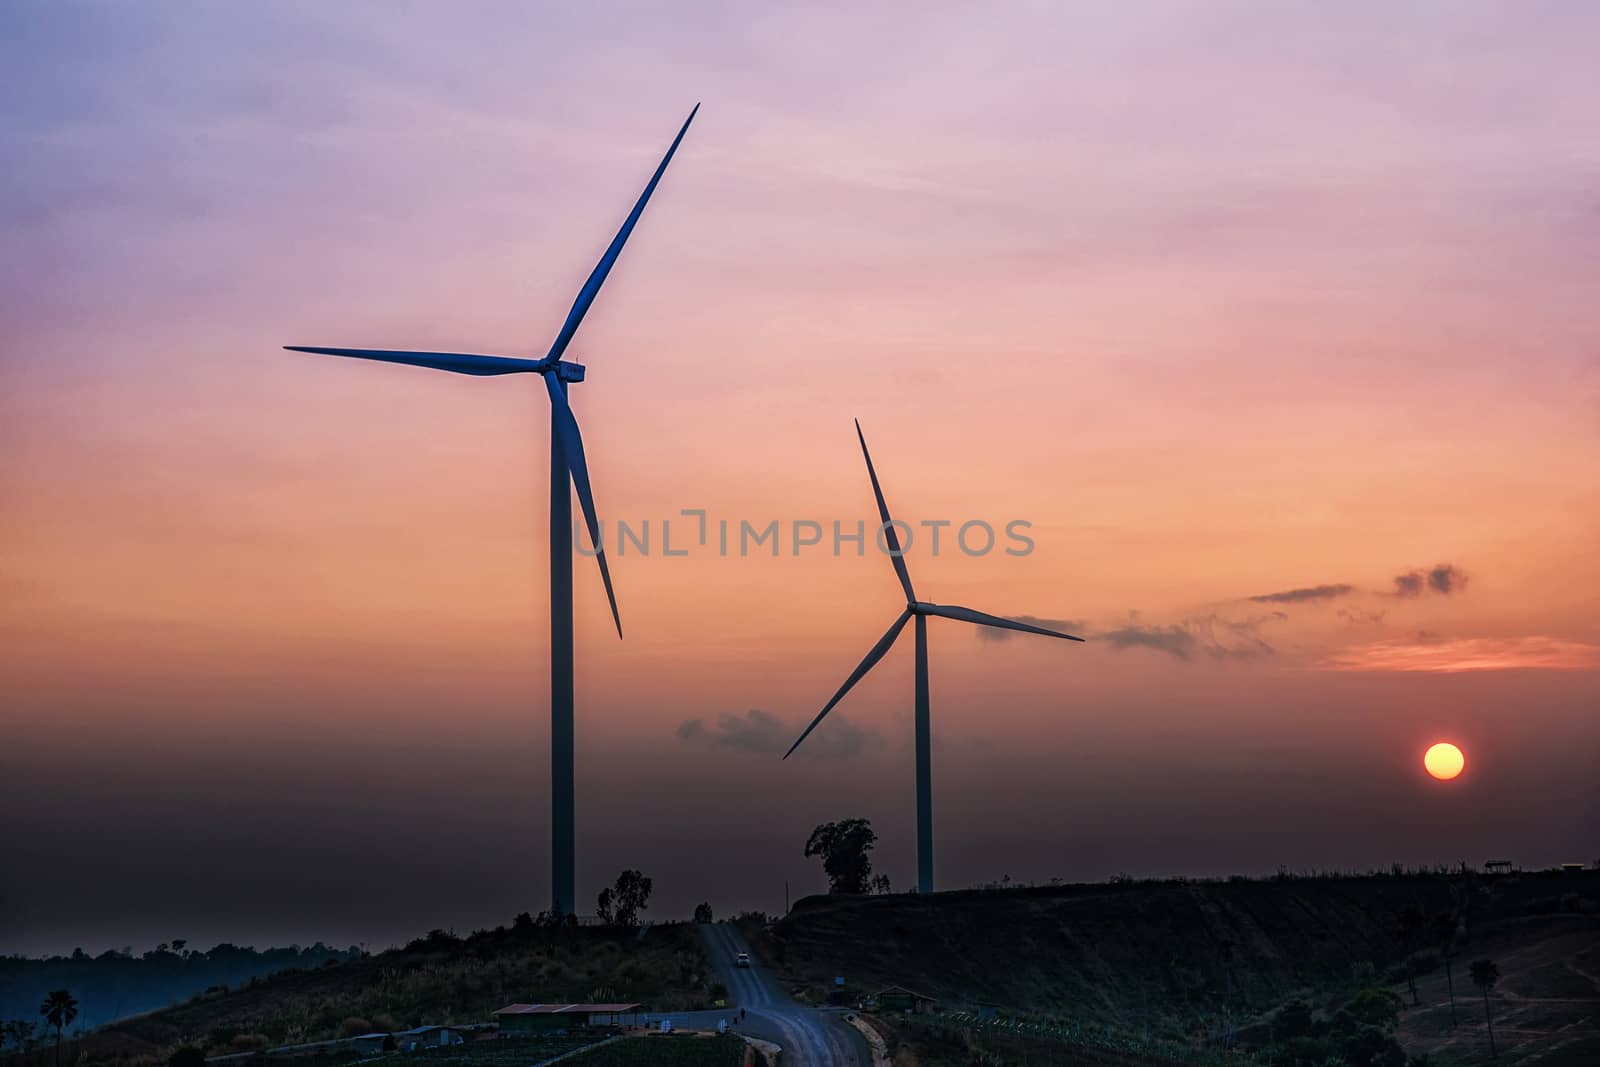 Wind Turbines over a sunset background.